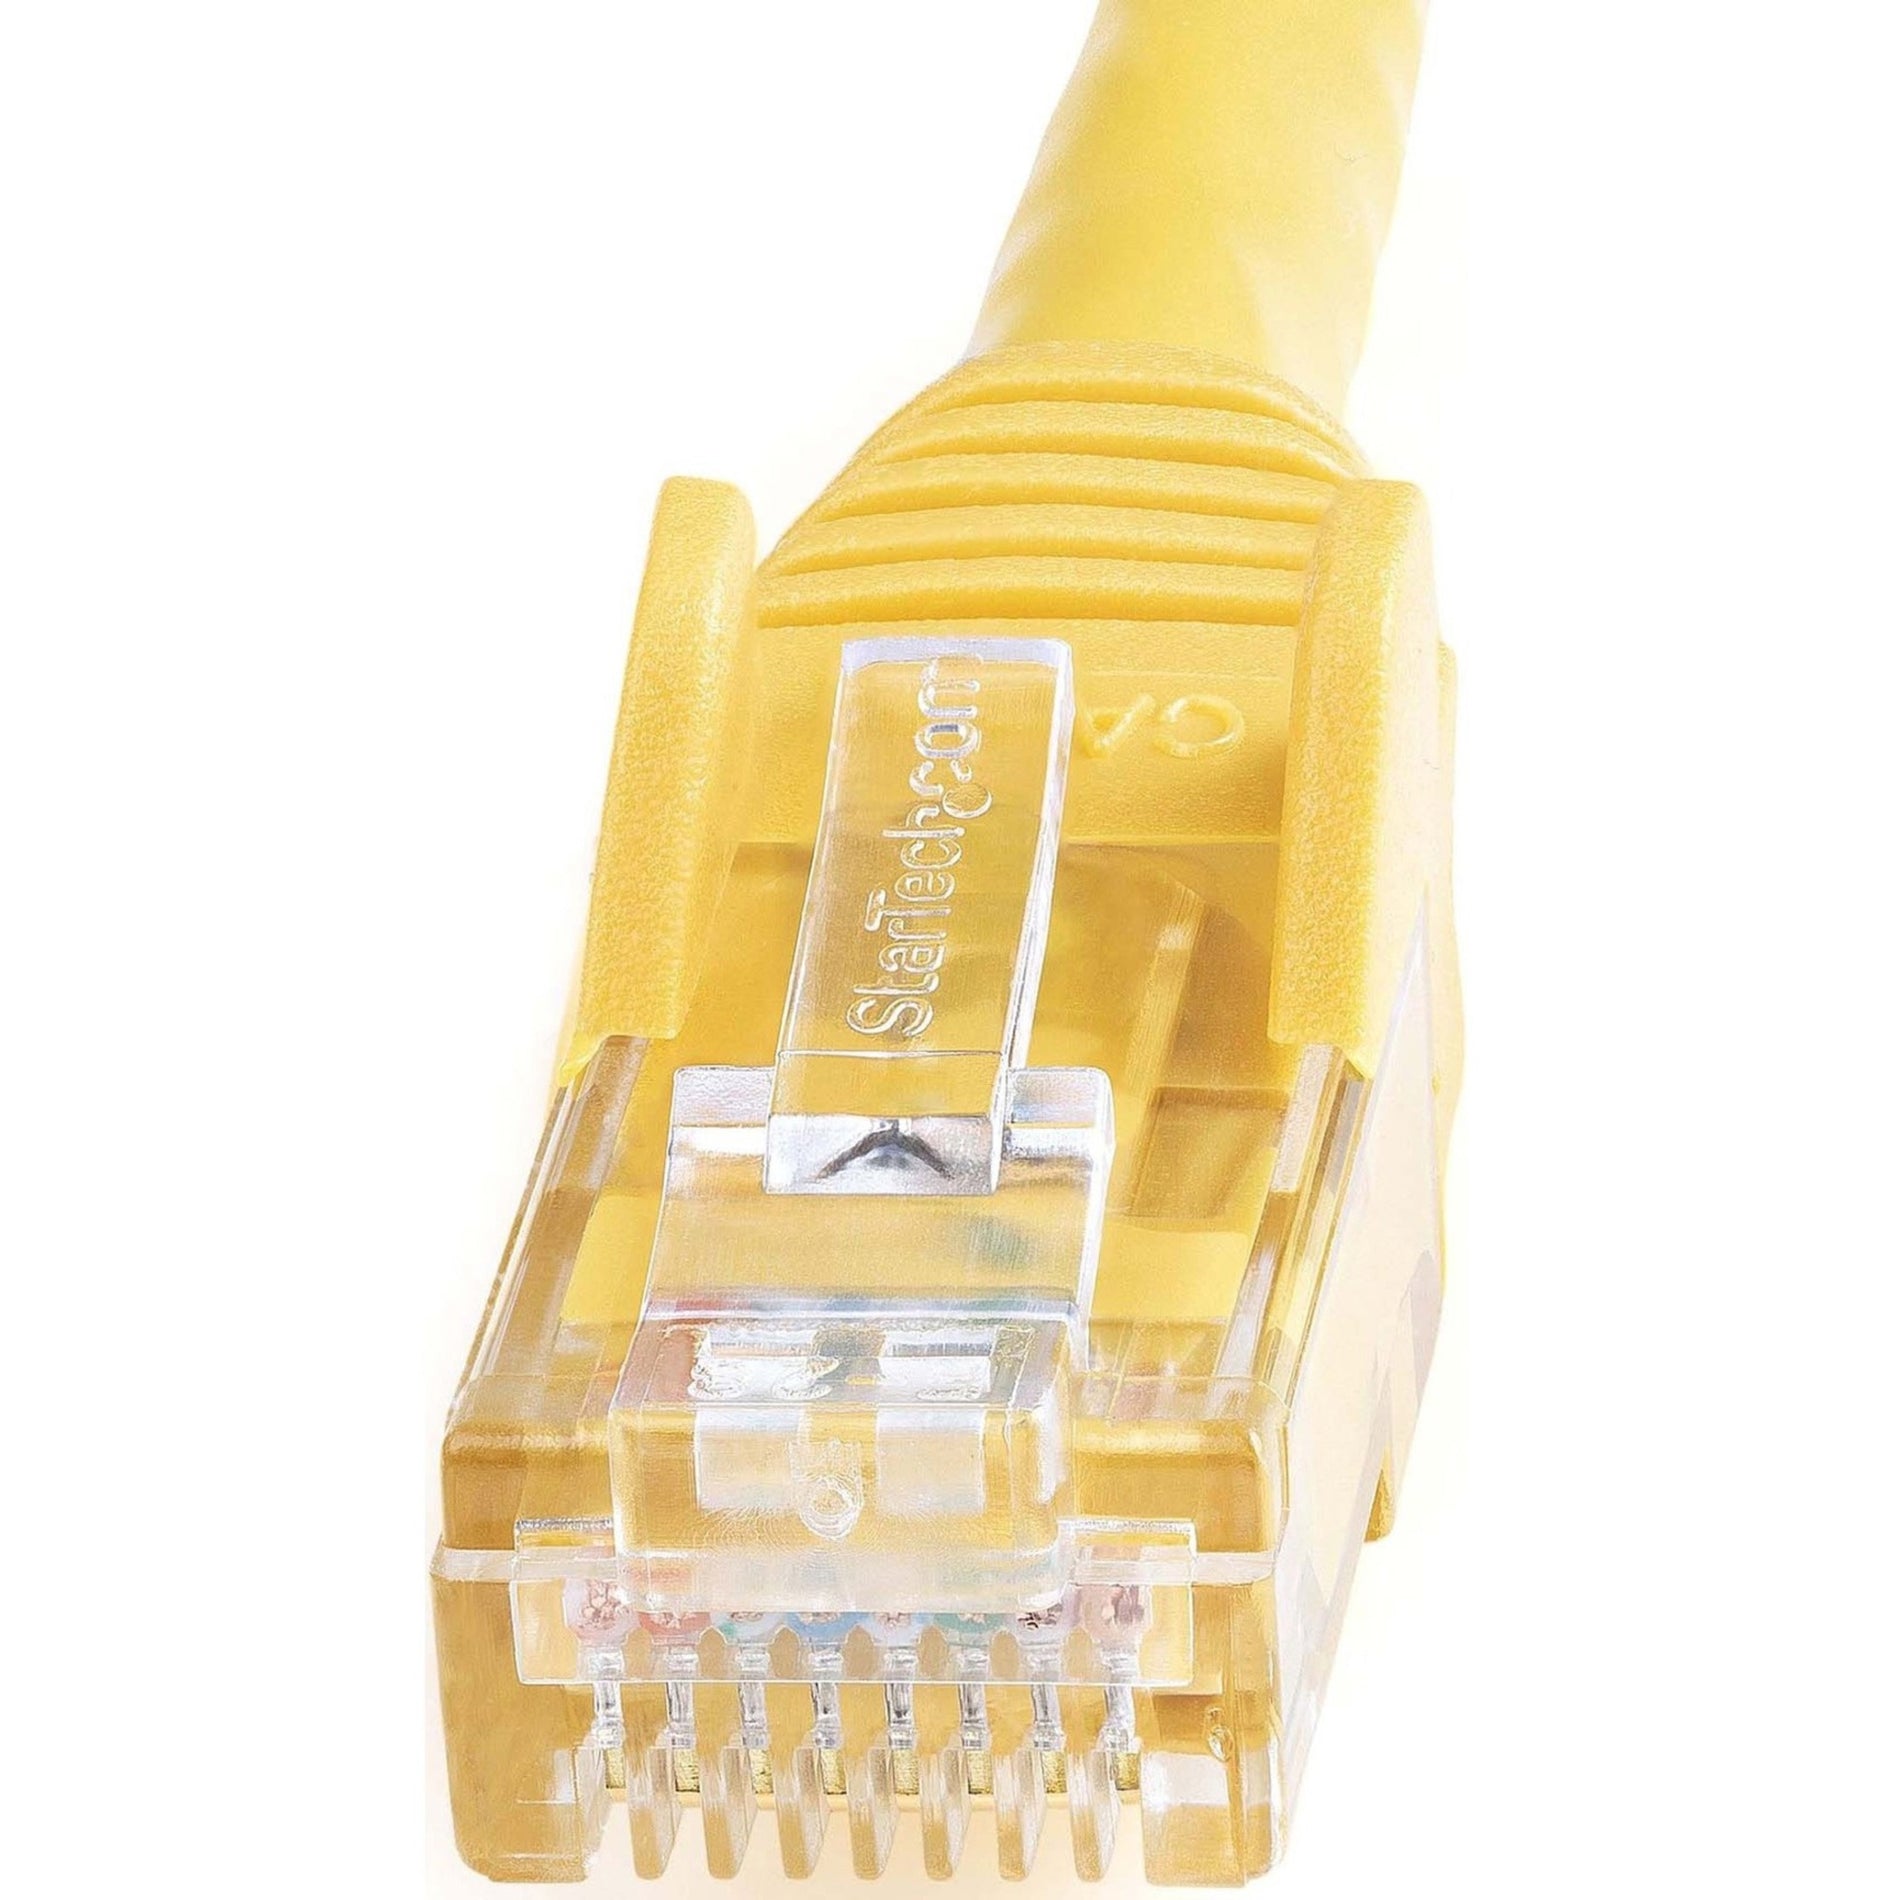 StarTech.com N6PATCH12YL Cat6 Patch Cable, 12ft Yellow Ethernet Cable, Snagless RJ45 Connectors